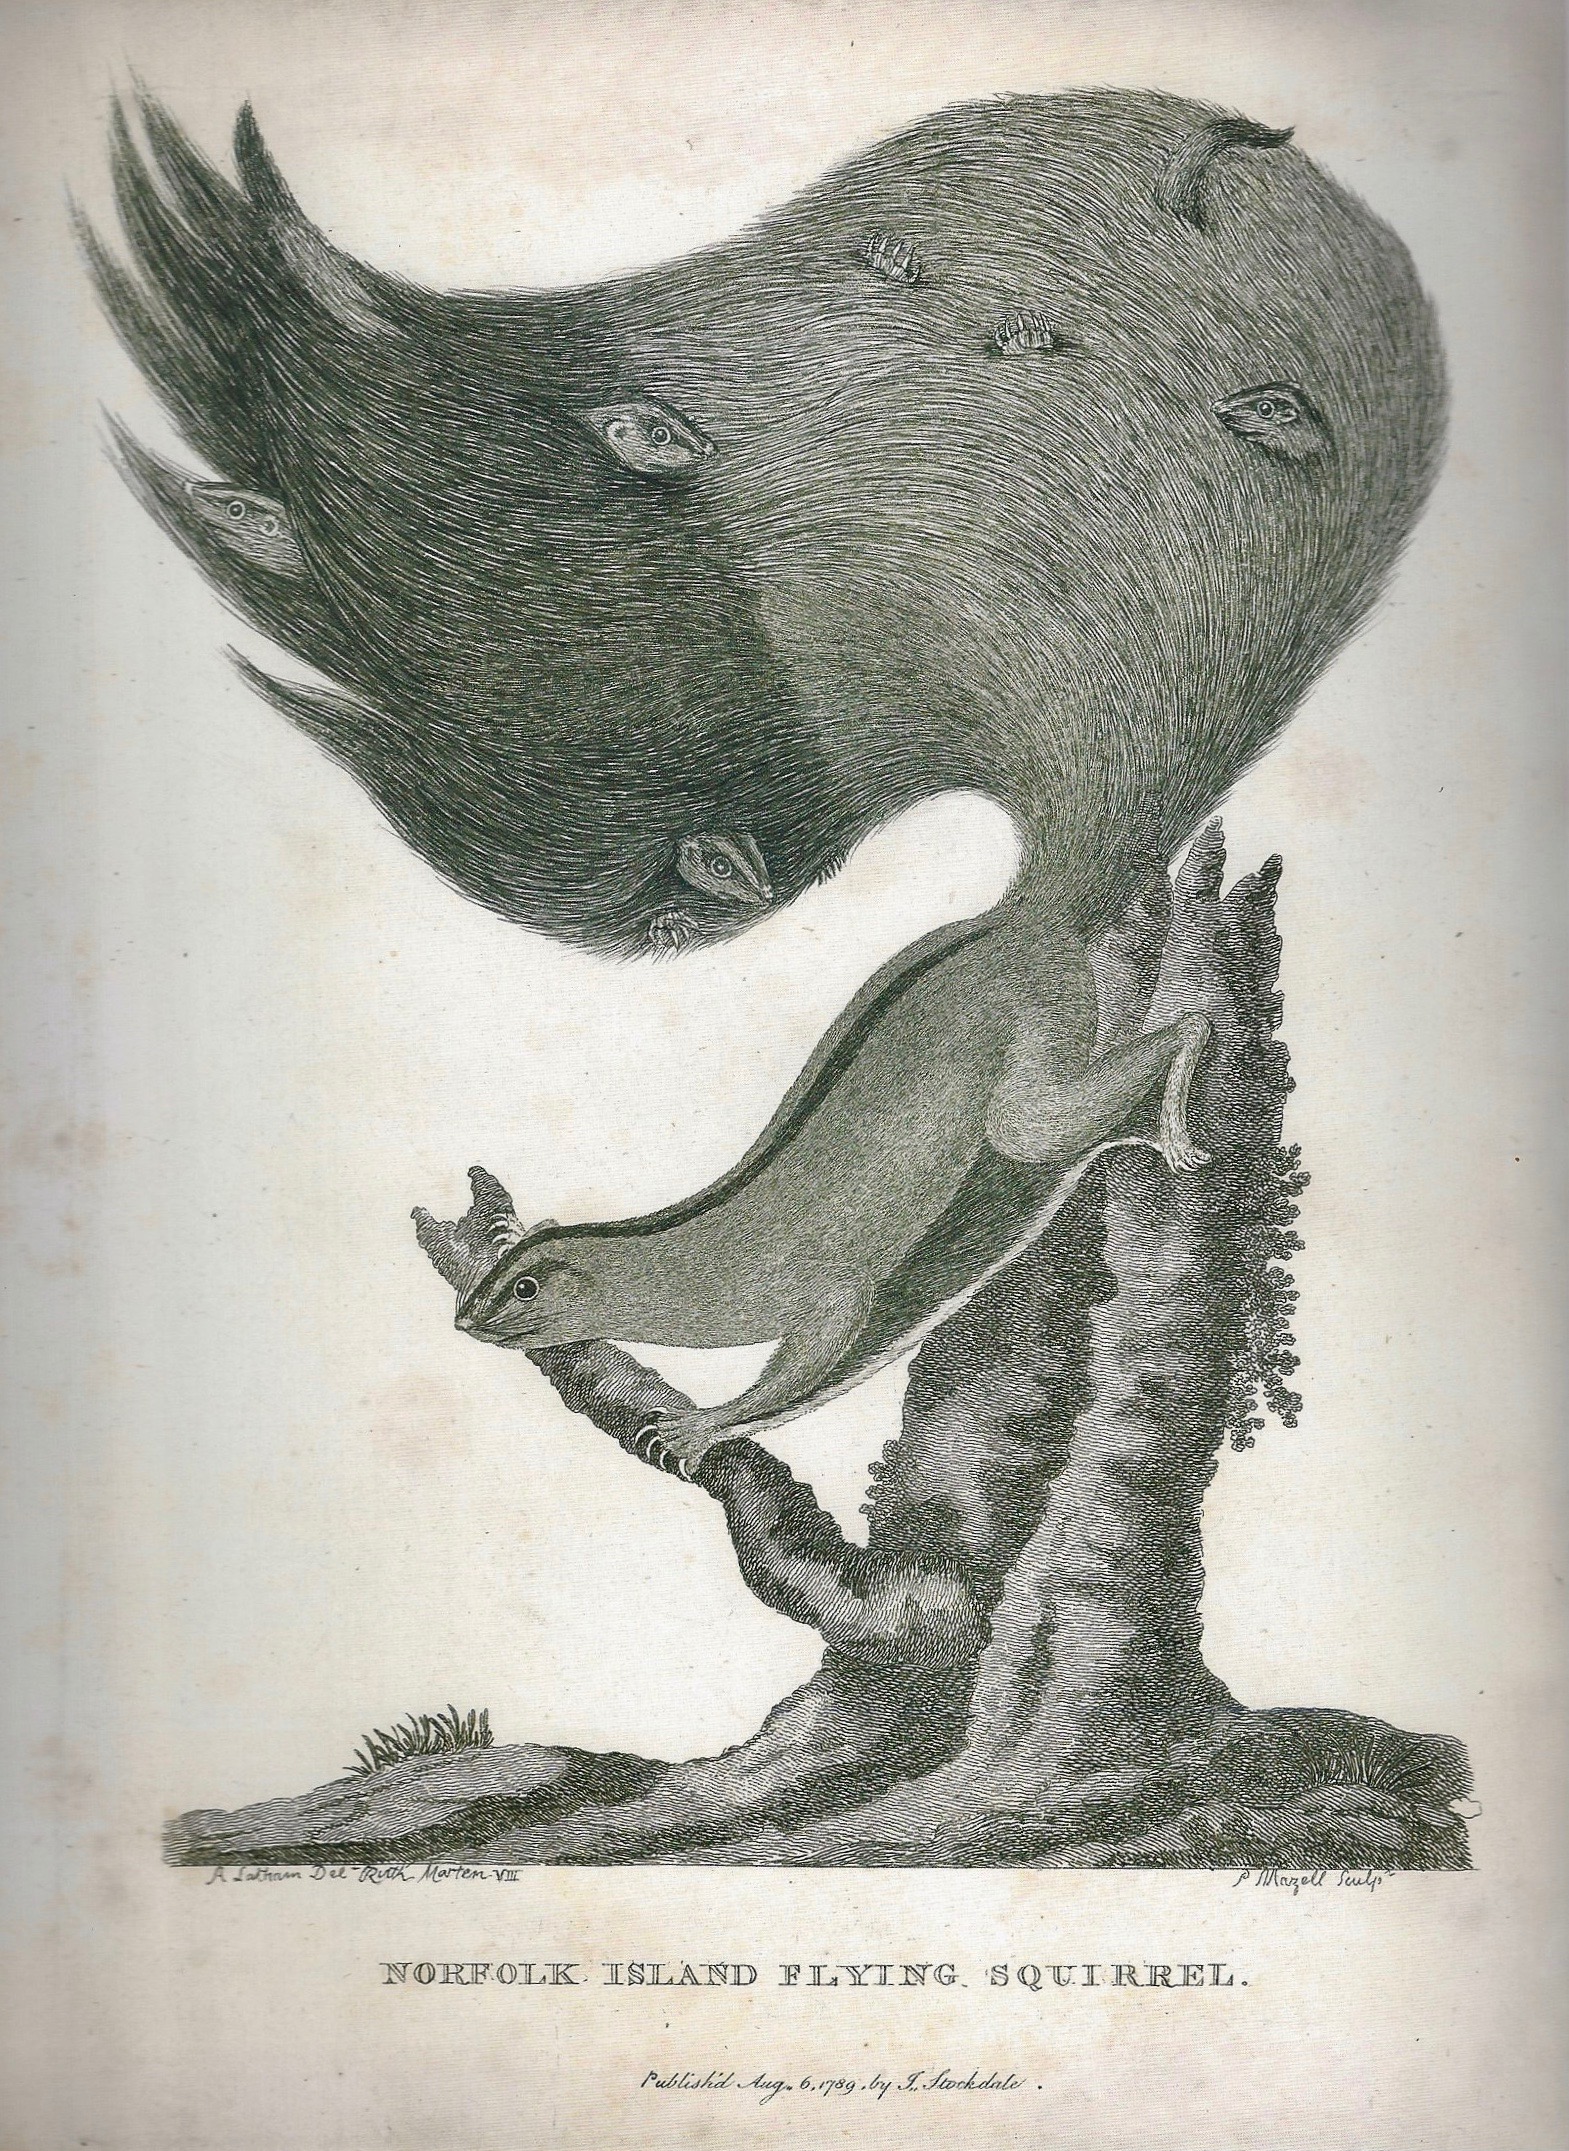 Squirrel, 2008, Ink on 18th century print, 27,5 x 20,3 cm (10,8 x 8 inches)